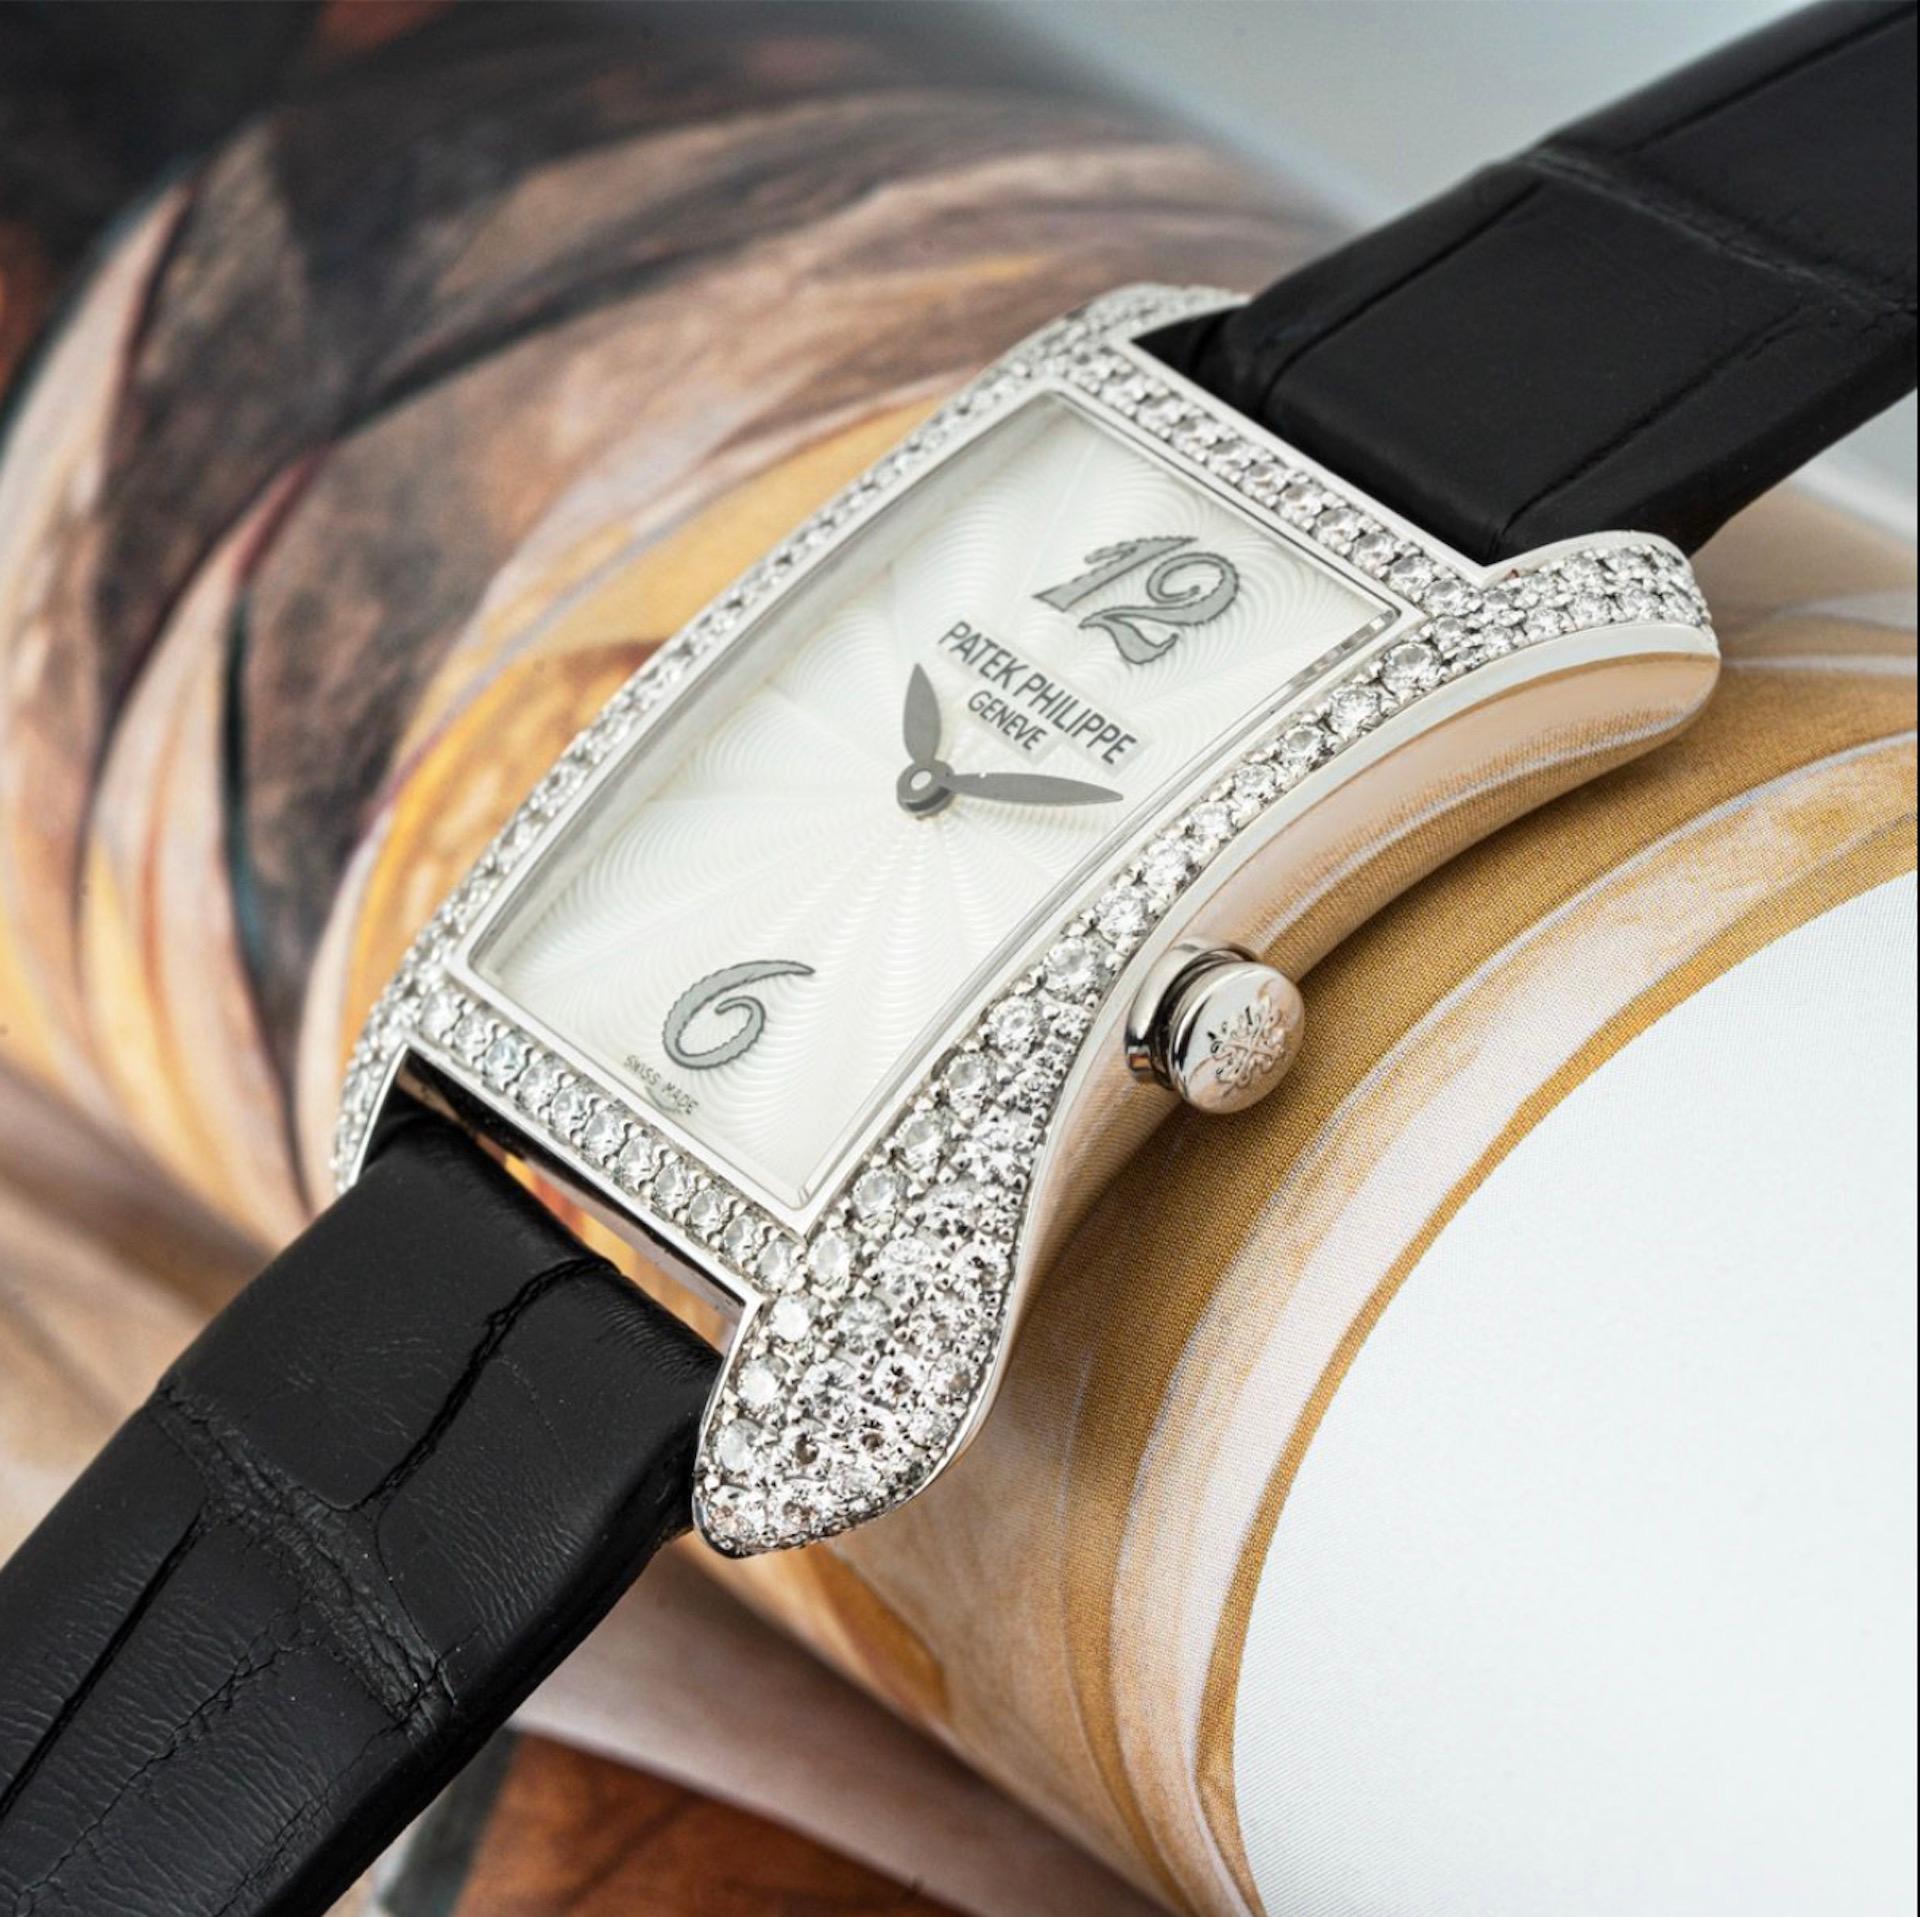 A ladies Patek Philippe Gondolo crafted in white gold. Featuring a distinctive guilloche mother of pearl dial with arabic numbers 12 and 6. Complementing the dial is a white gold case set with 130 round brilliant cut diamonds weighing 1.52ct.

The